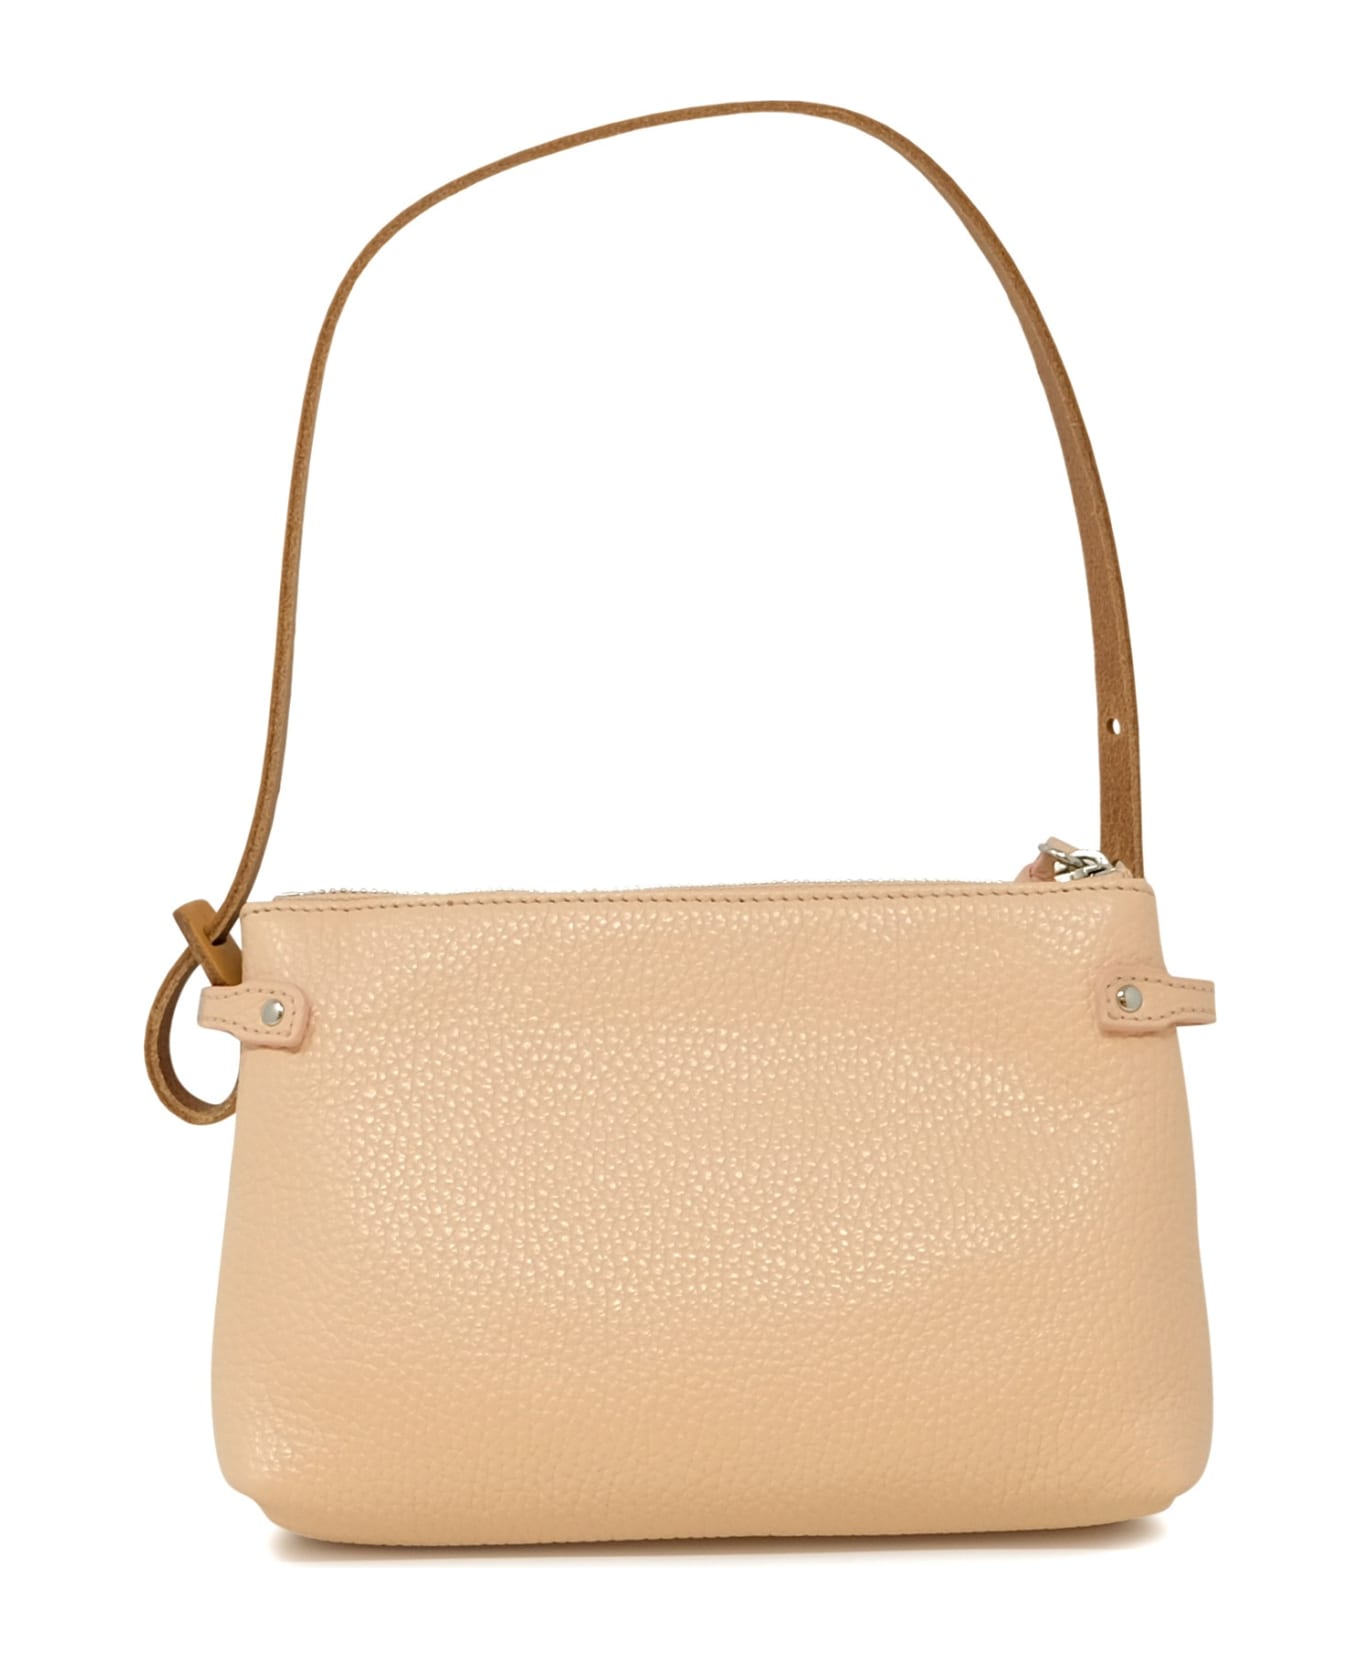 Zanellato Rose Cocoon Leather Tuka Daily Bag - PINK